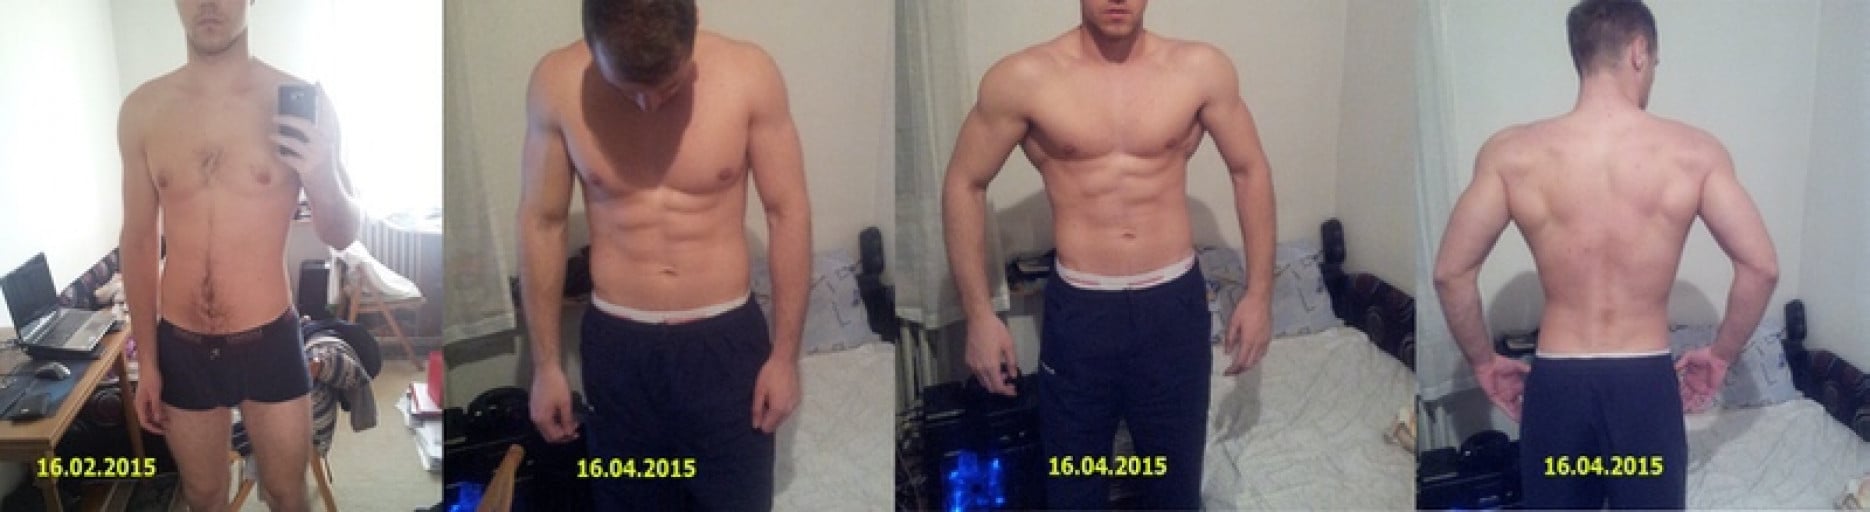 A before and after photo of a 6'4" male showing a muscle gain from 180 pounds to 195 pounds. A total gain of 15 pounds.